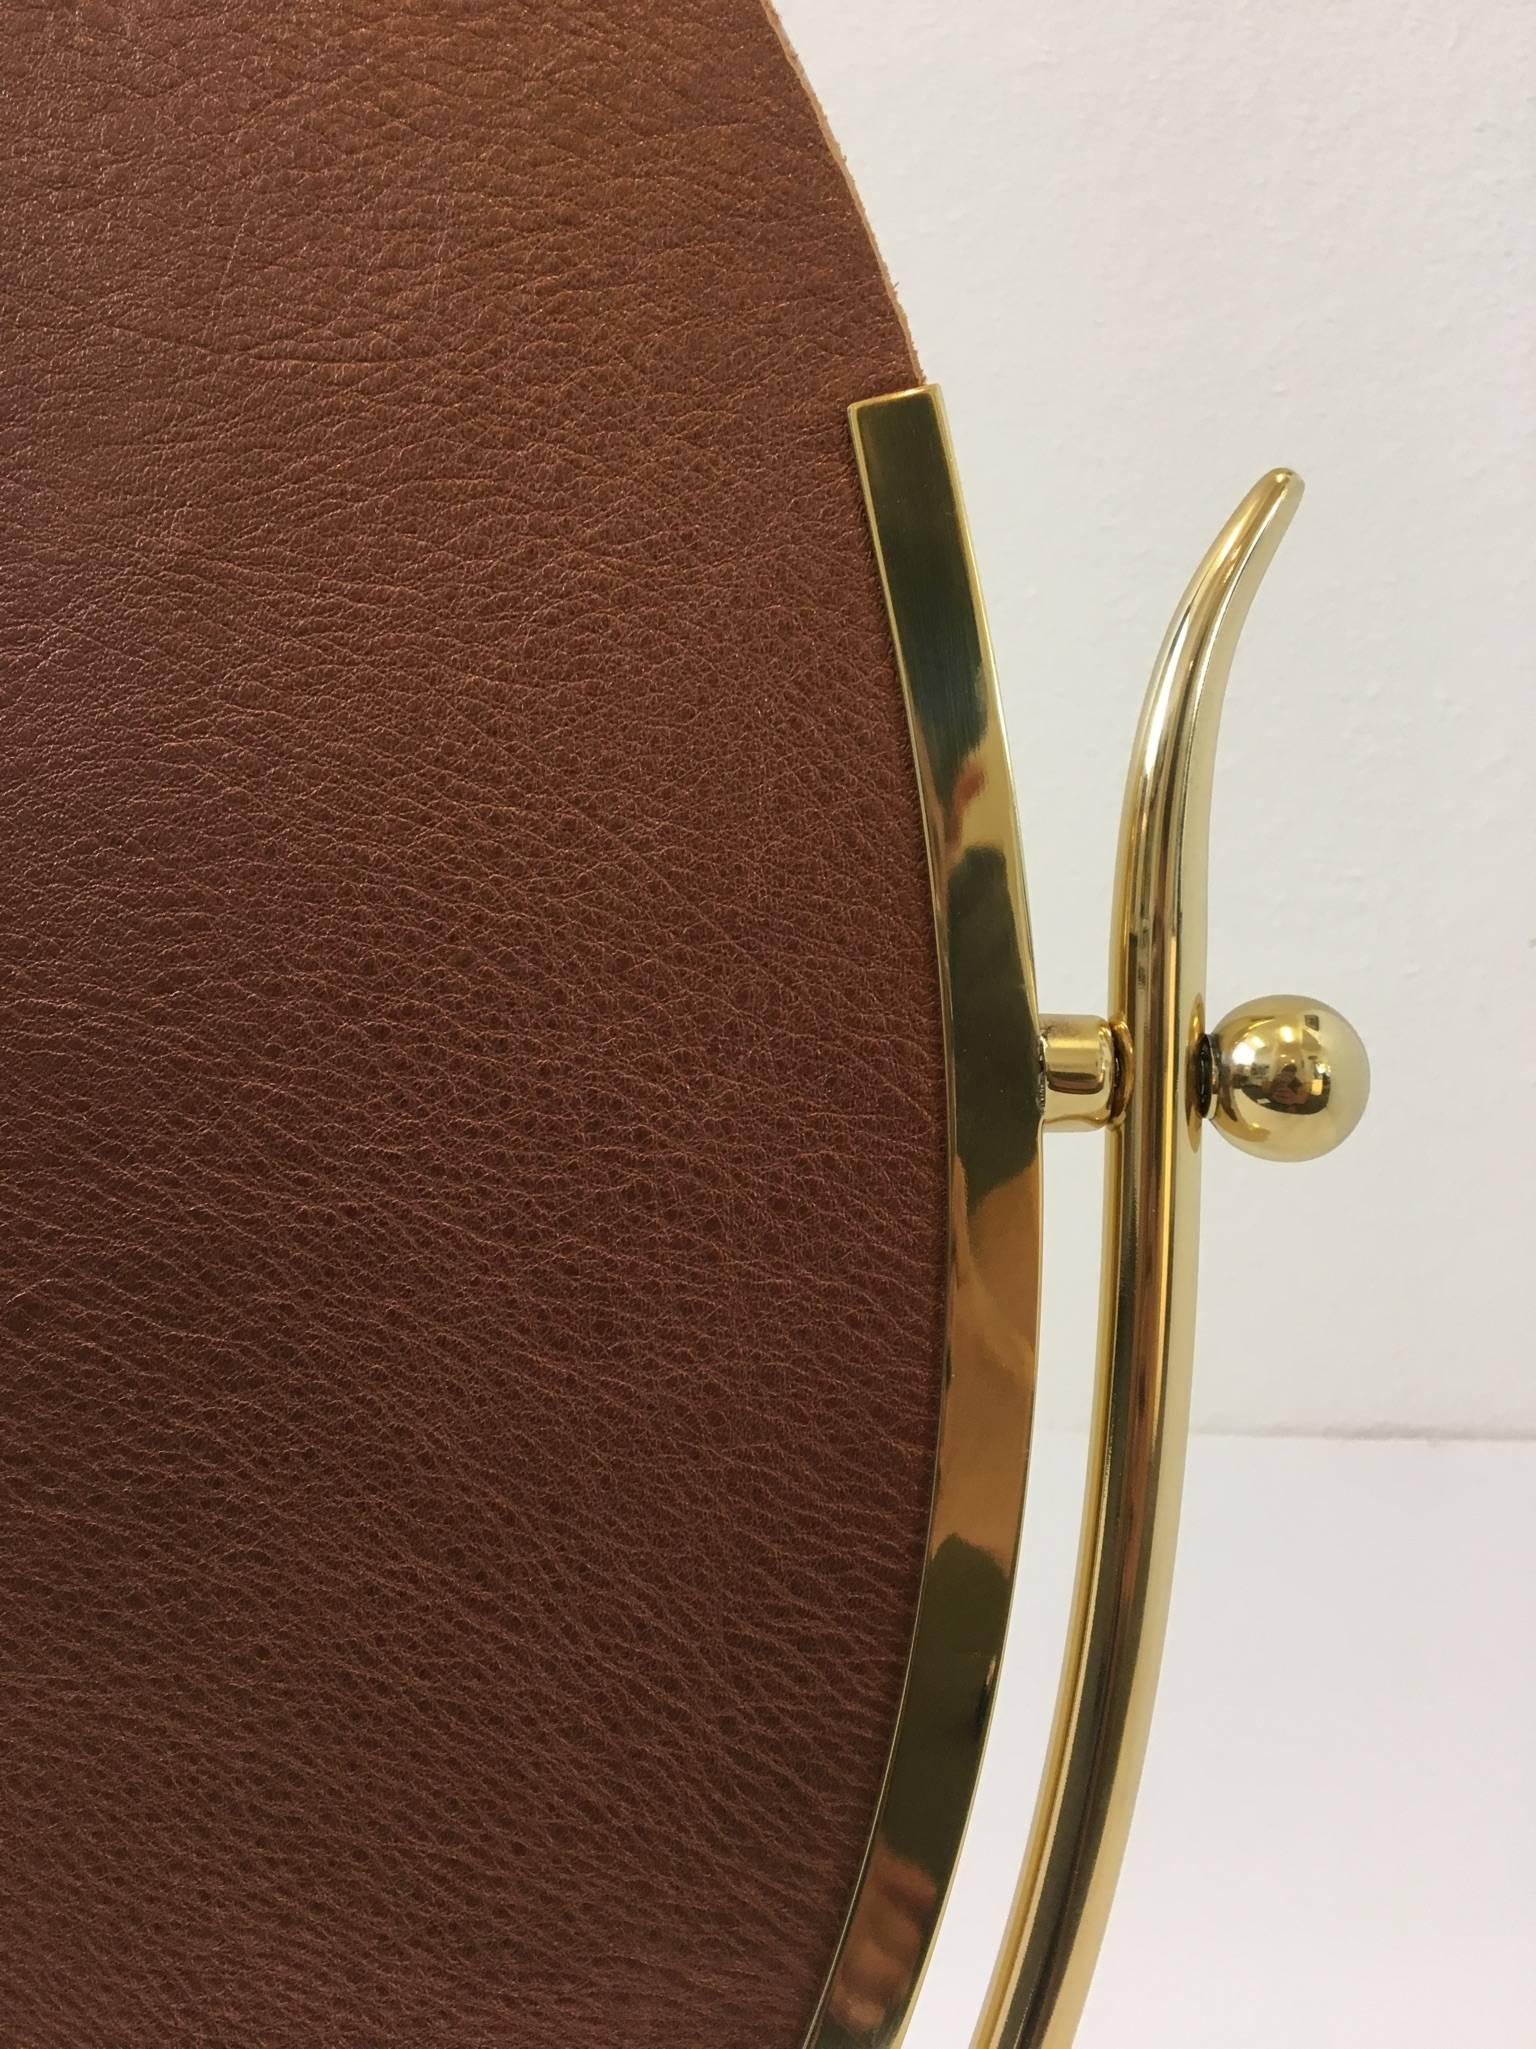 Late 20th Century Polish Brass and Leather Vanity Mirror by Charles Hollis Jones